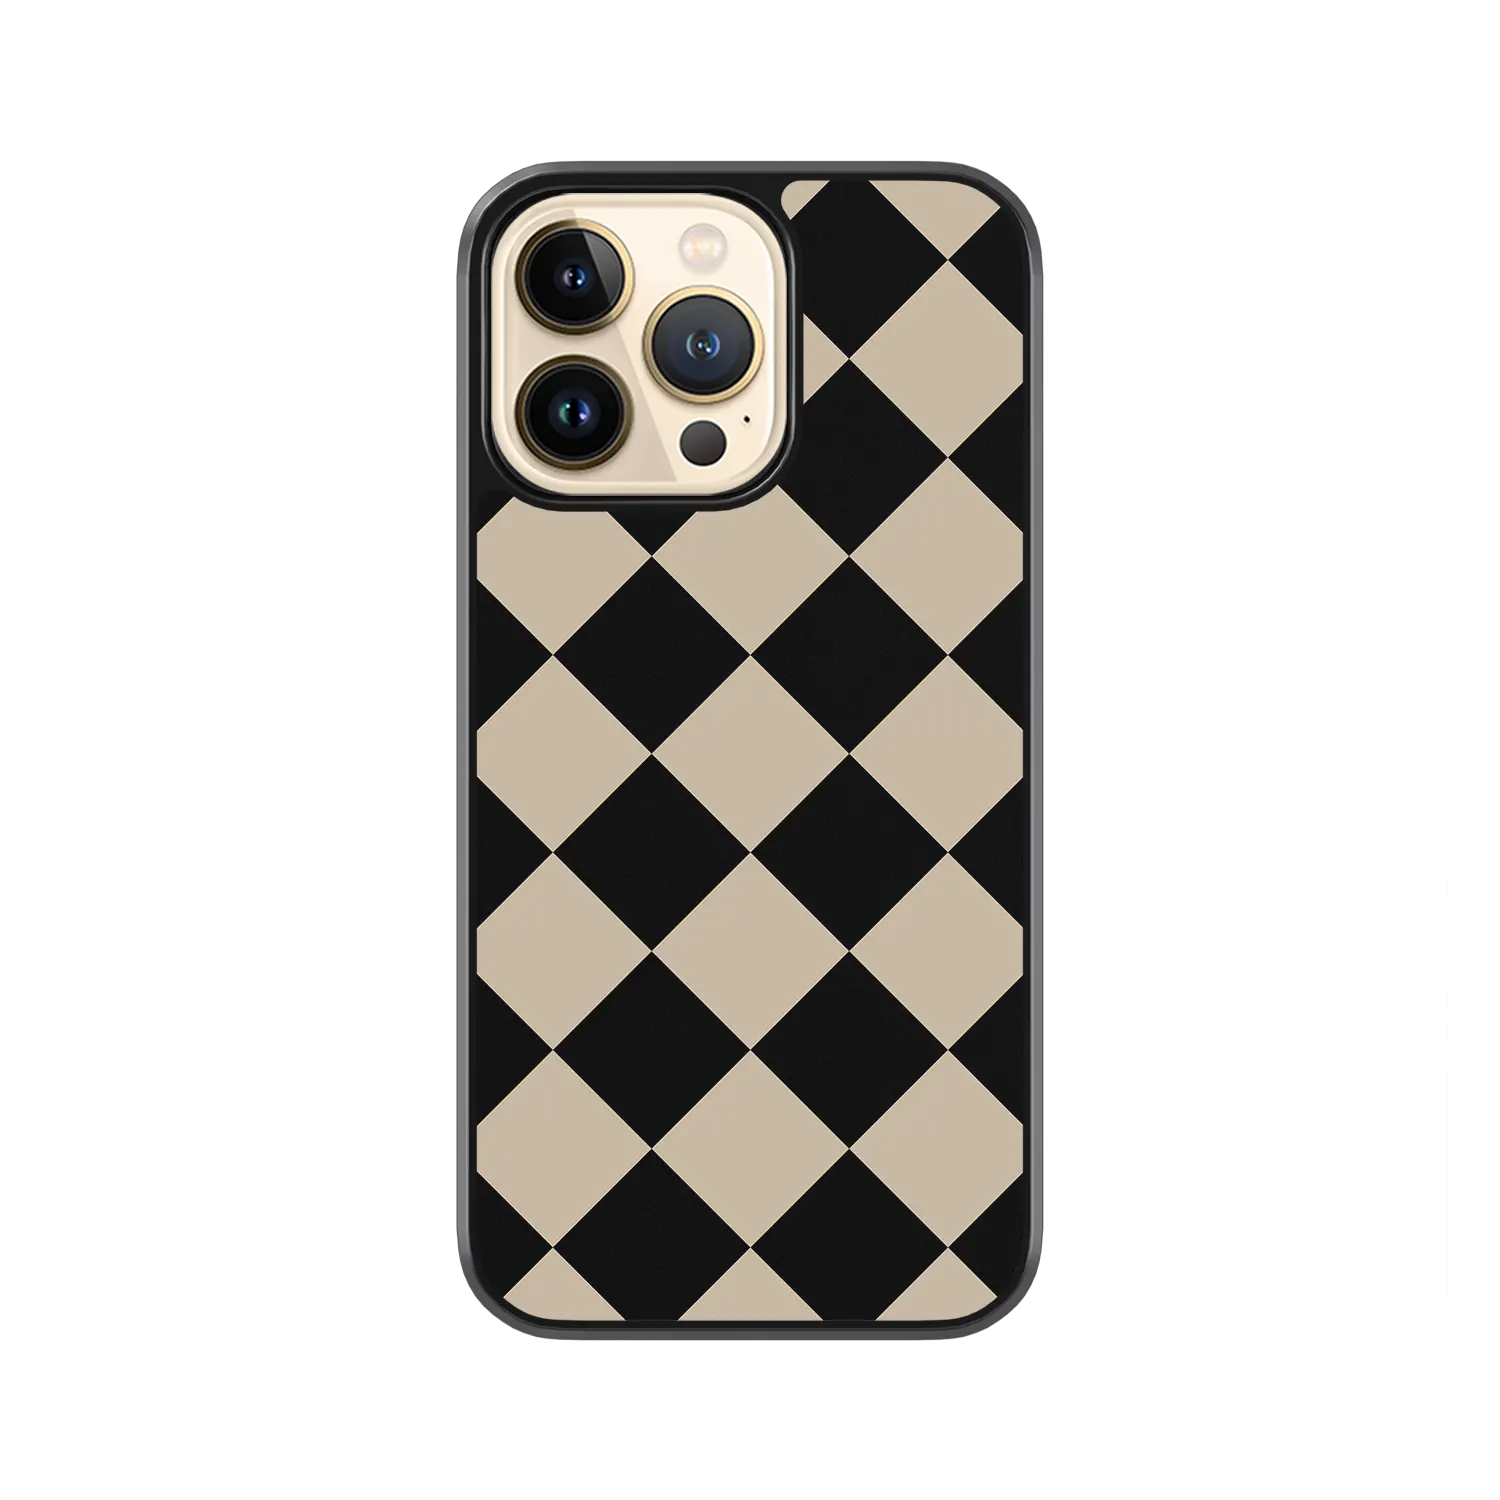 Chess iphone 12 pro case